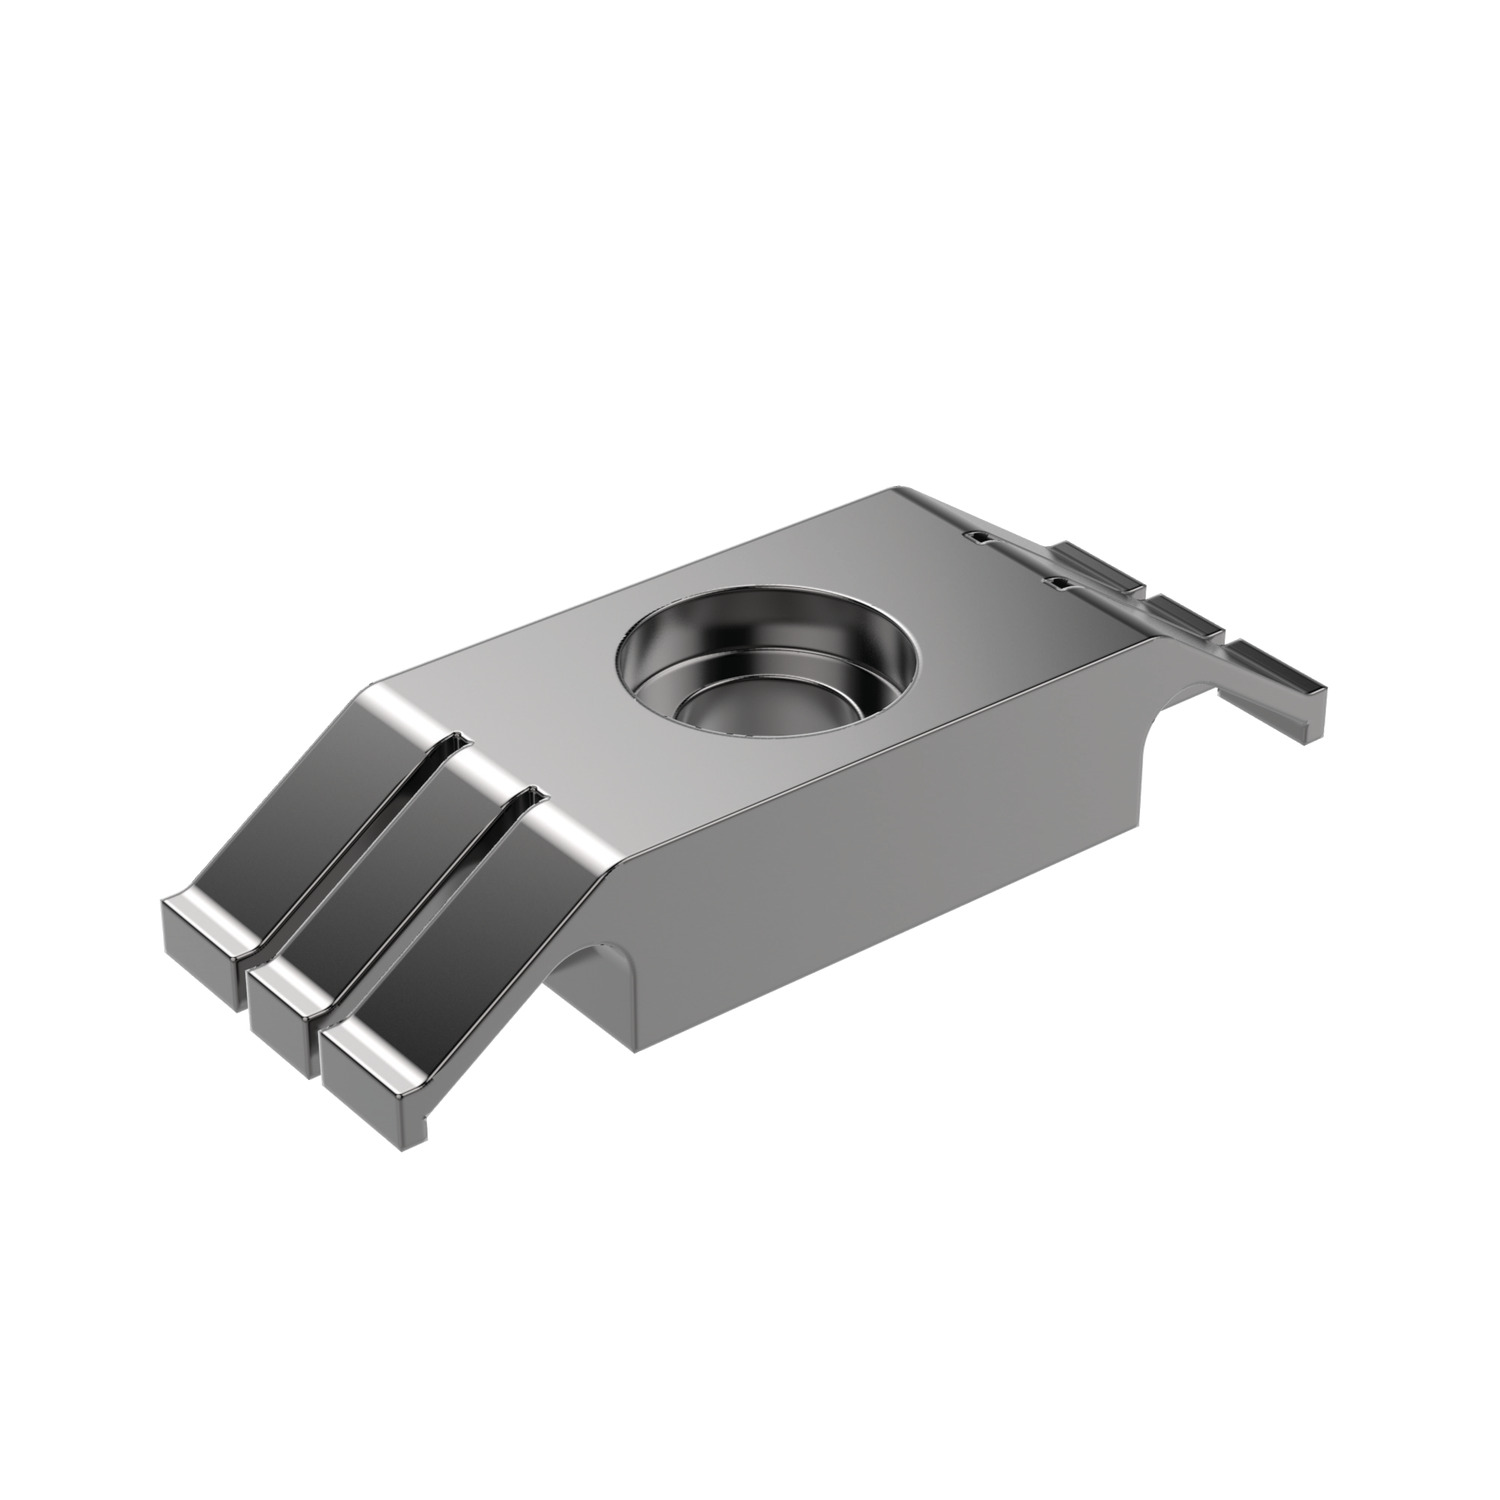 1.0 Ton Fixed Stops Hardened Steel fixed clamp. A low height, very powerful compact clamp. Supplied with clamping screw.